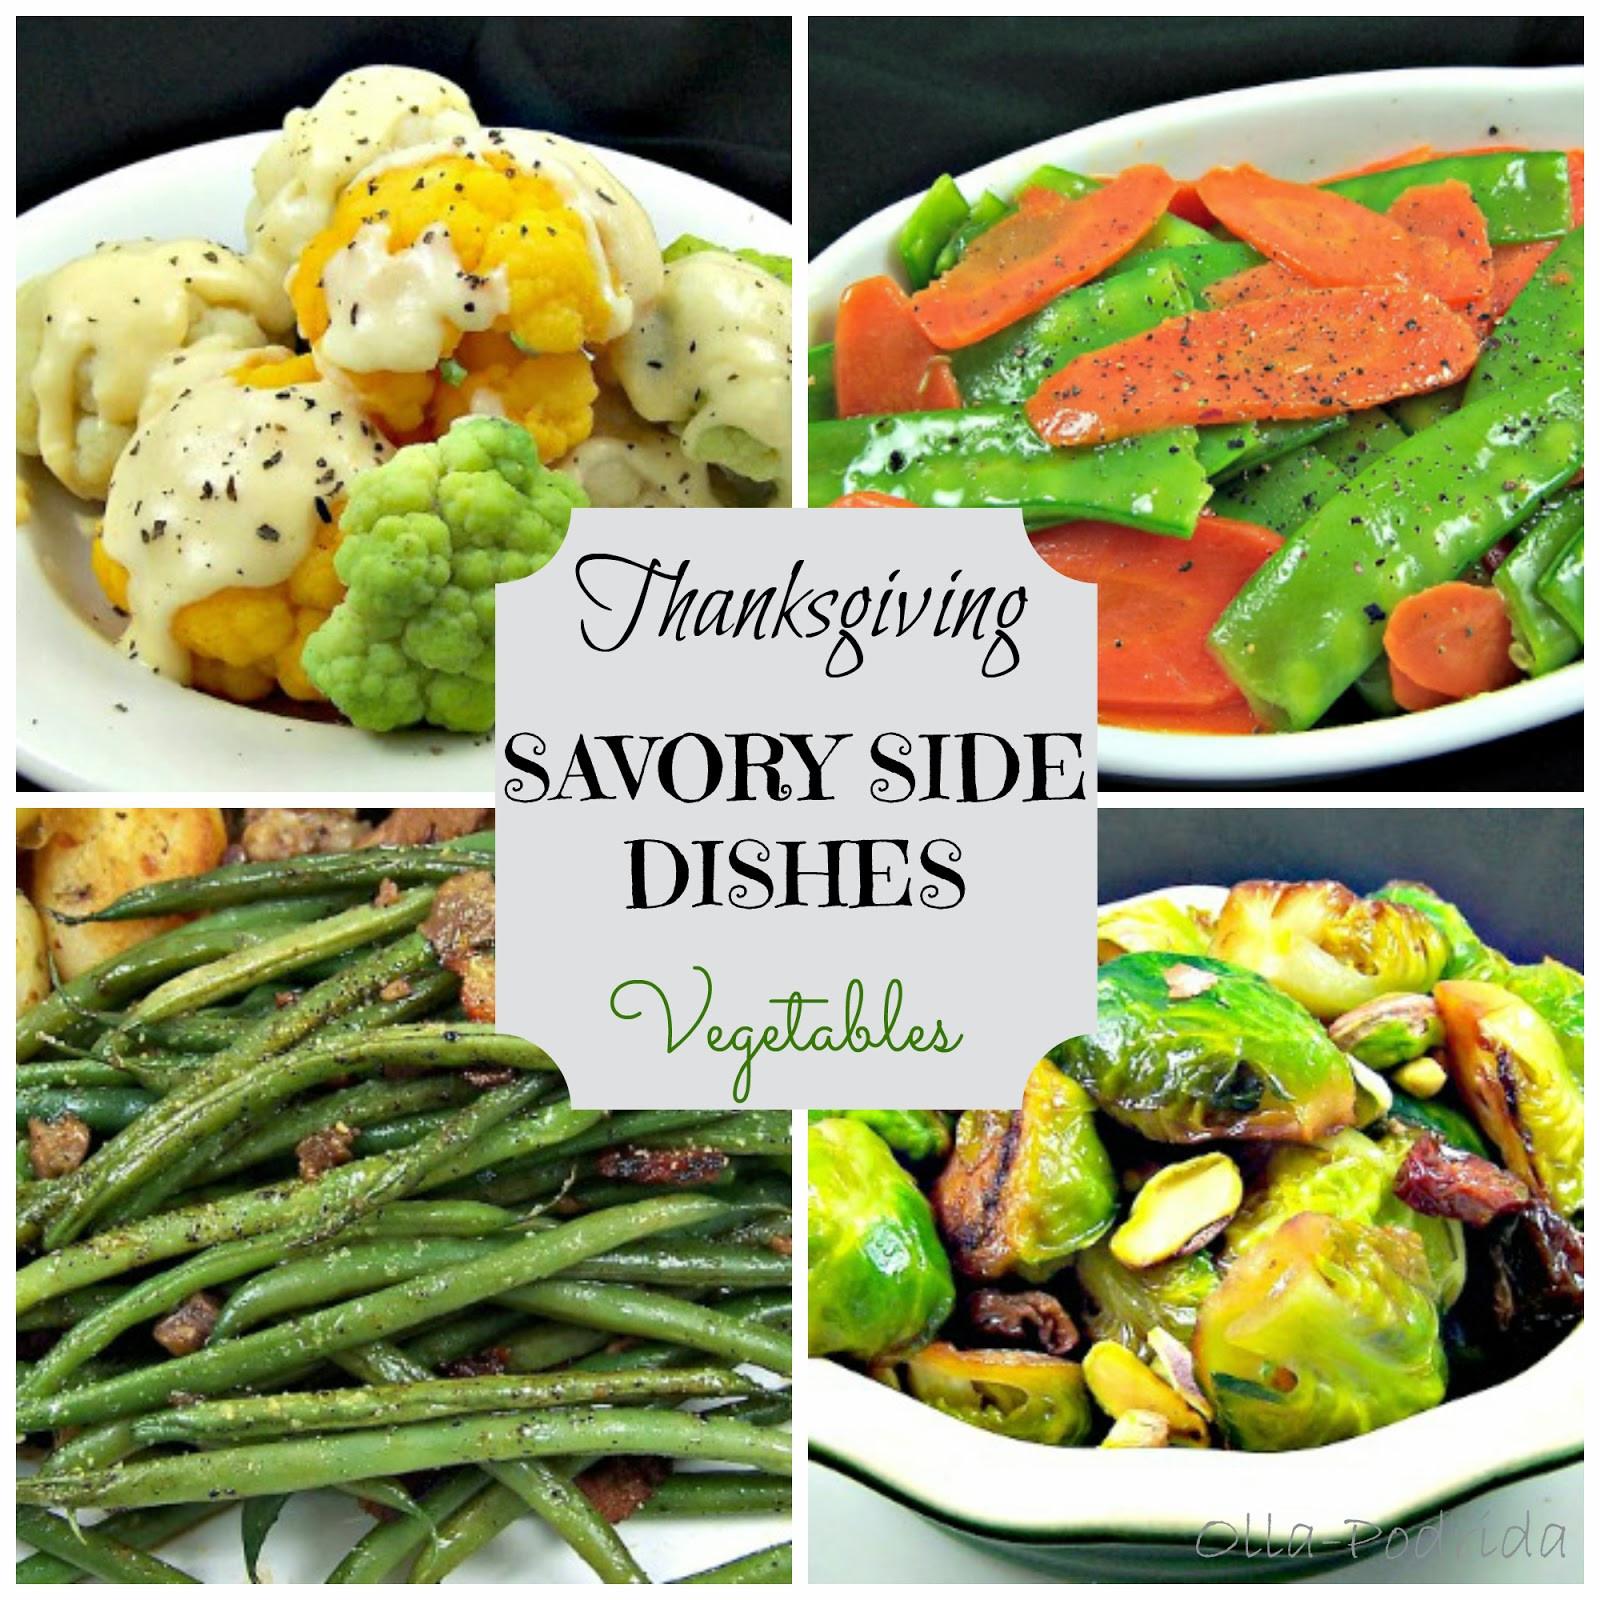 Veggie Side Dishes For Thanksgiving
 Olla Podrida Thanksgiving Savory Side Dishes Ve ables